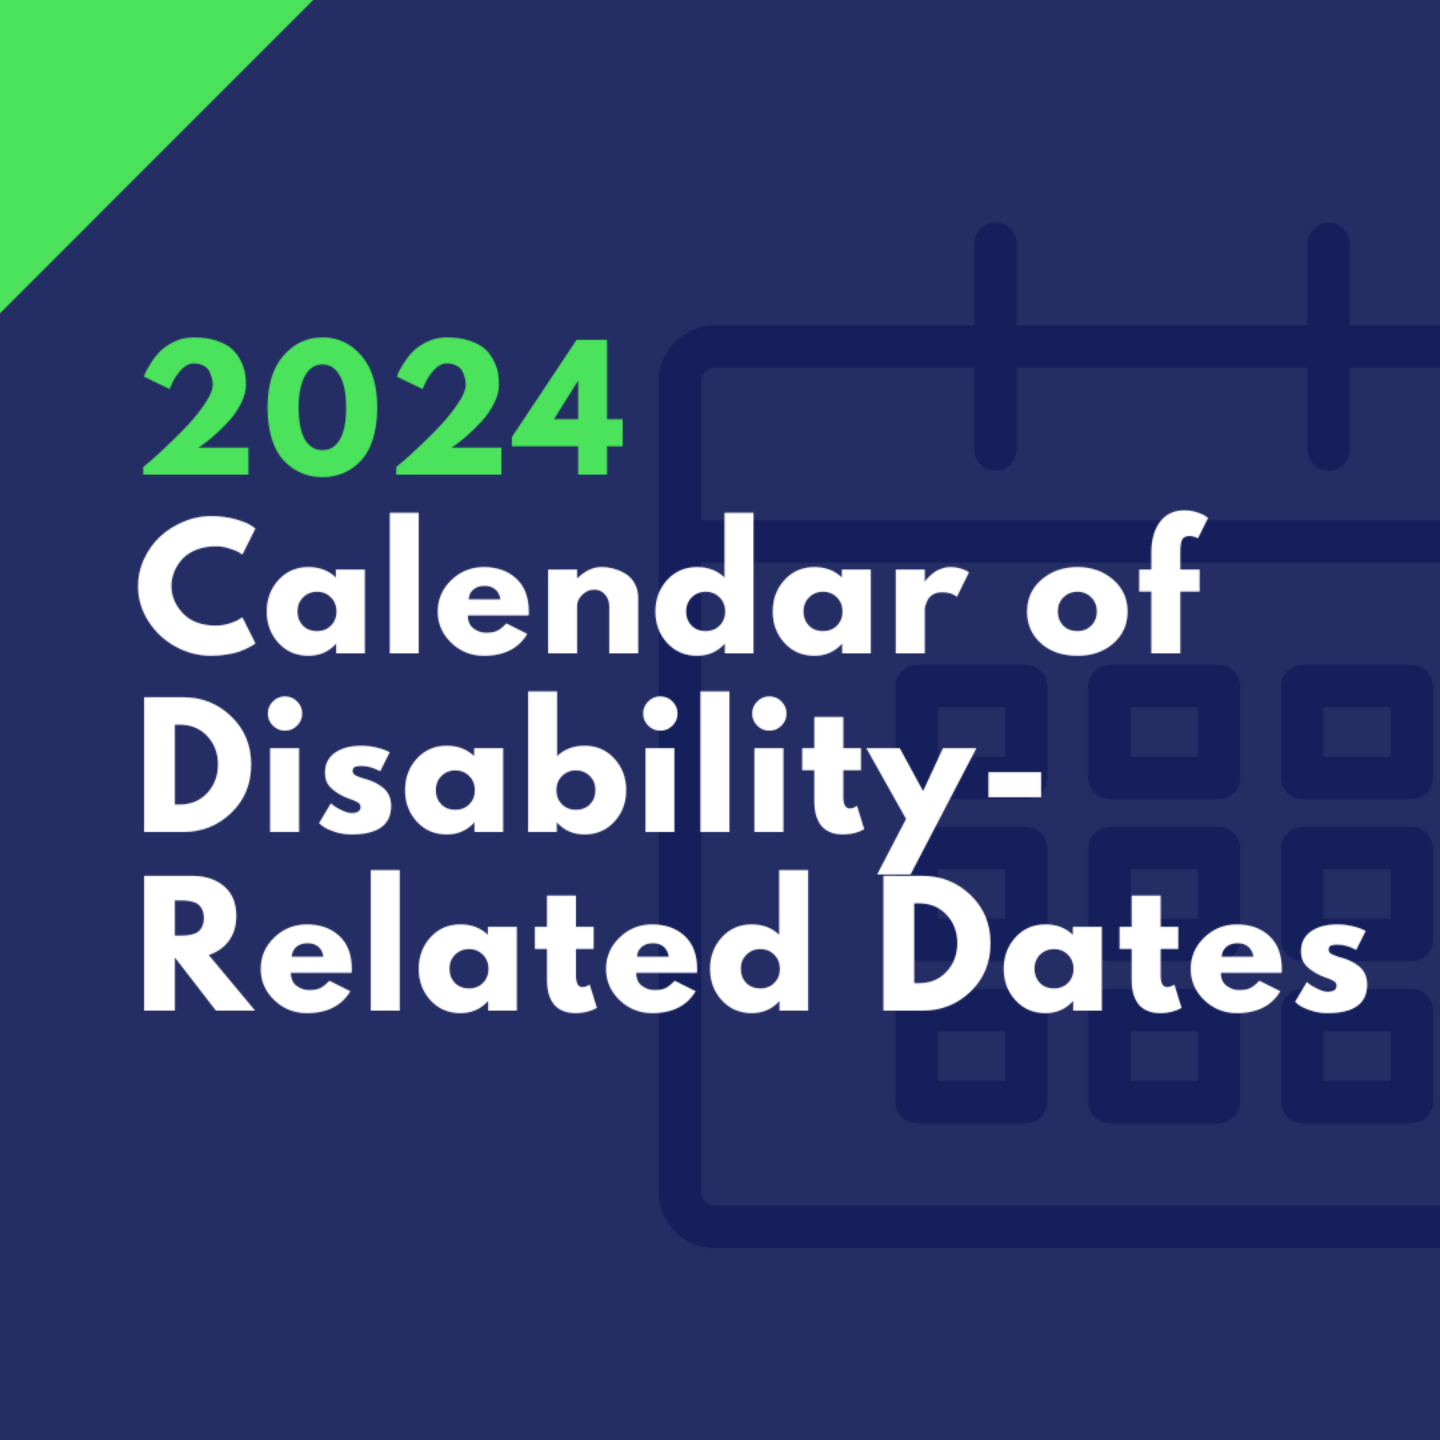 Dark blue background with a calendar pattern behind white and green text reading 2024 Calendar of Disability Related Dates.